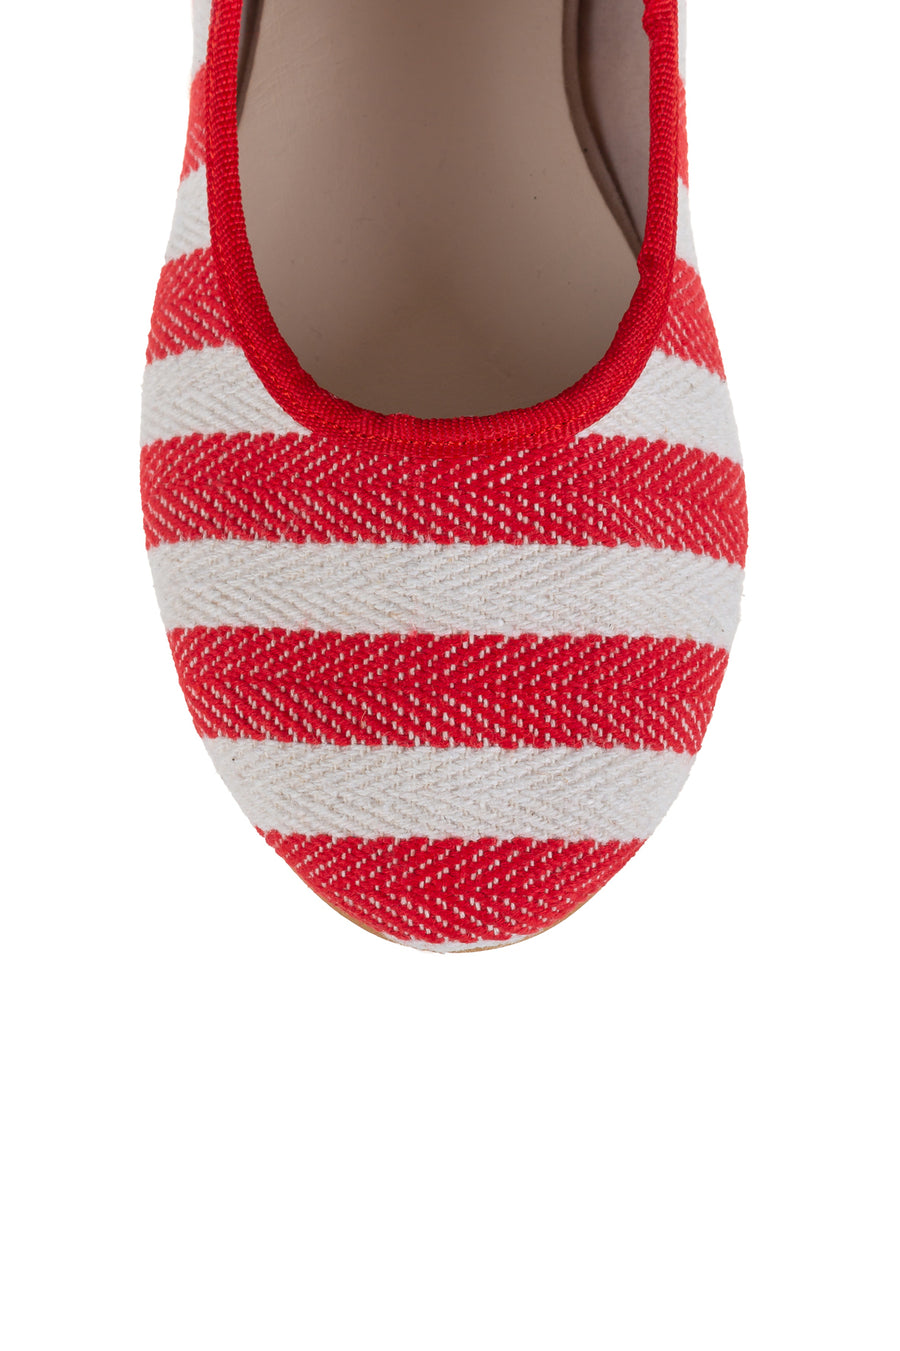 Red Striped Mary Jane by MOI London - Gifted Products